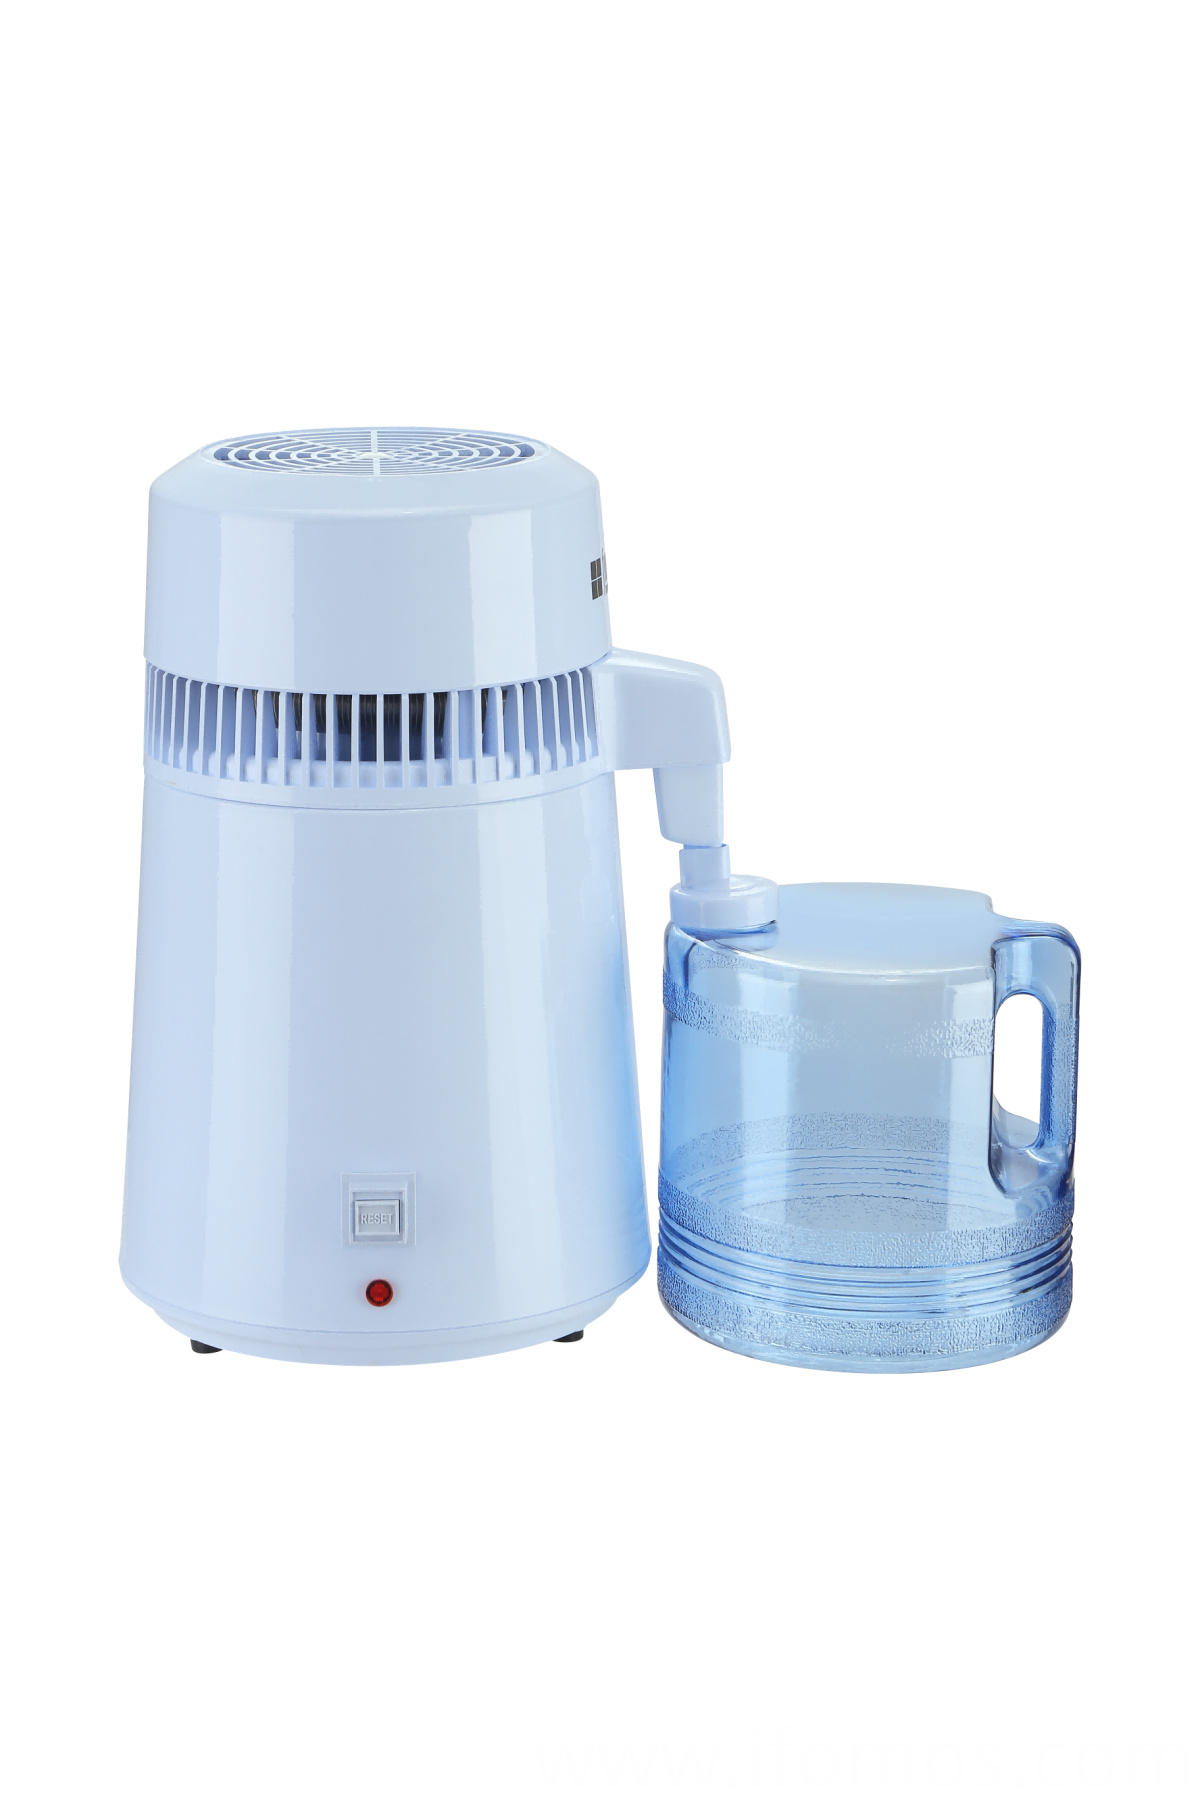 Fomos Commercial multifunctional distilled water machine China Manufacturer